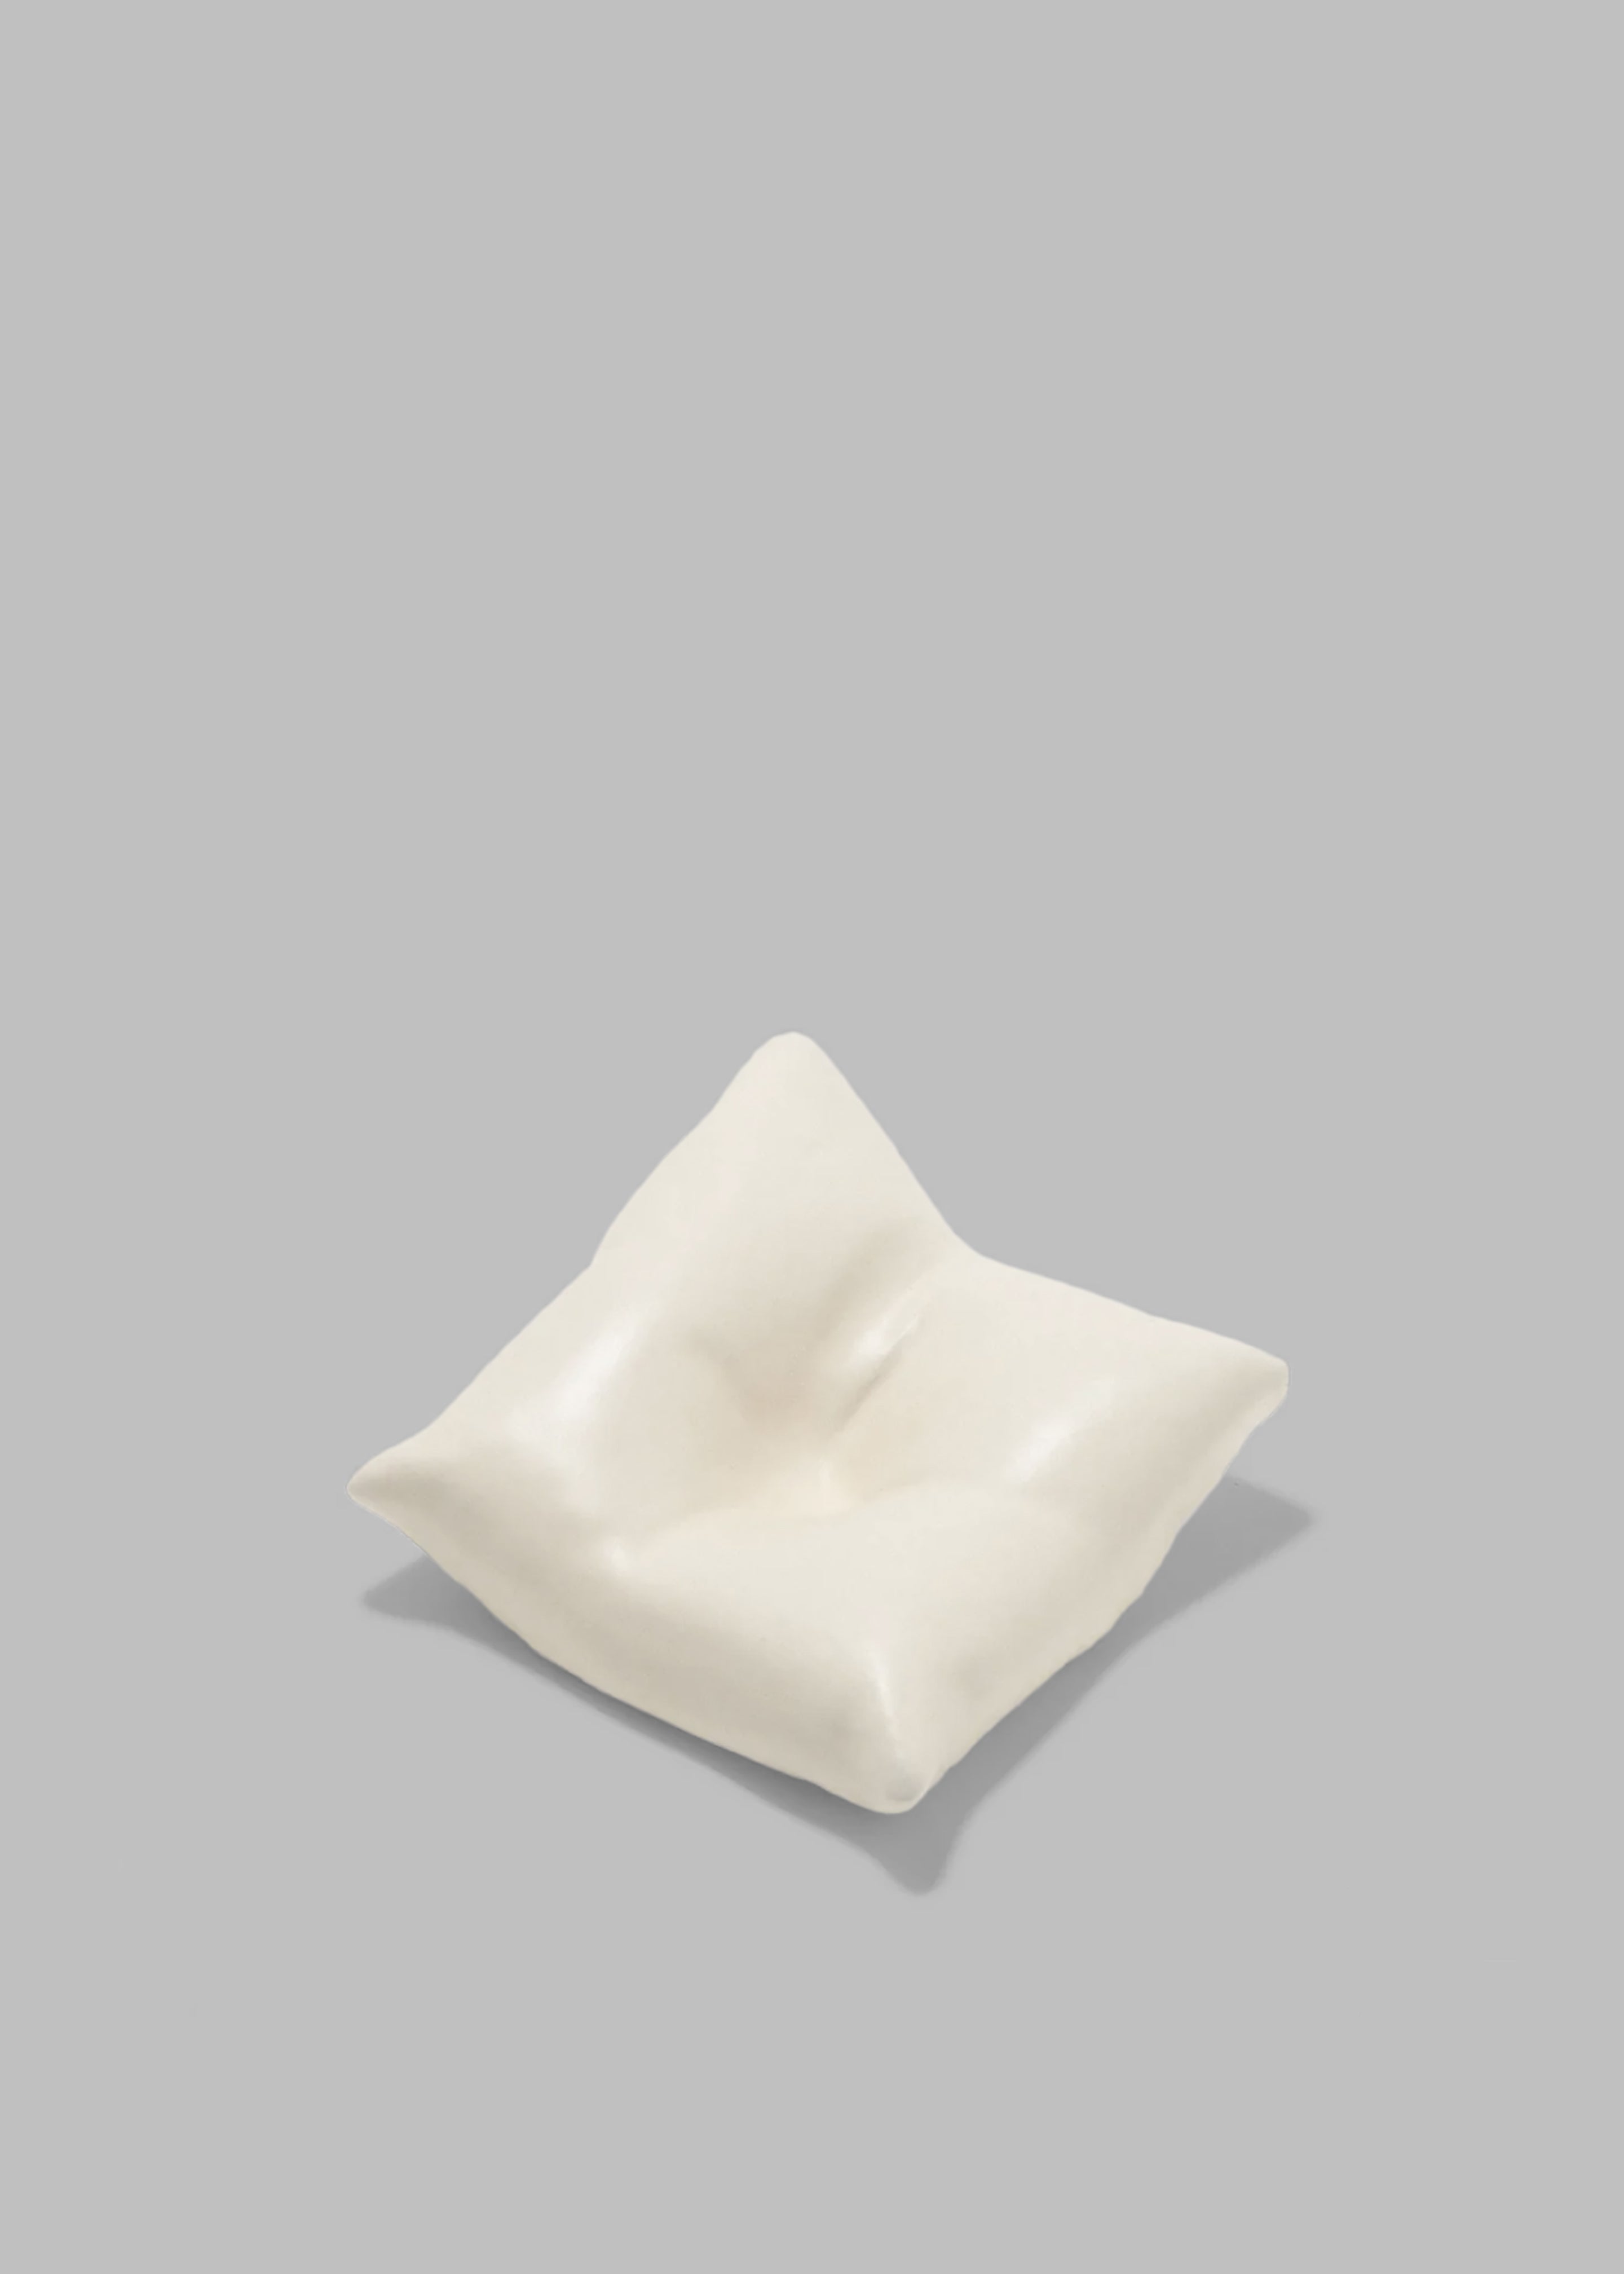 Completedworks Bumped II Ceramic Cushion - Matte White - 1